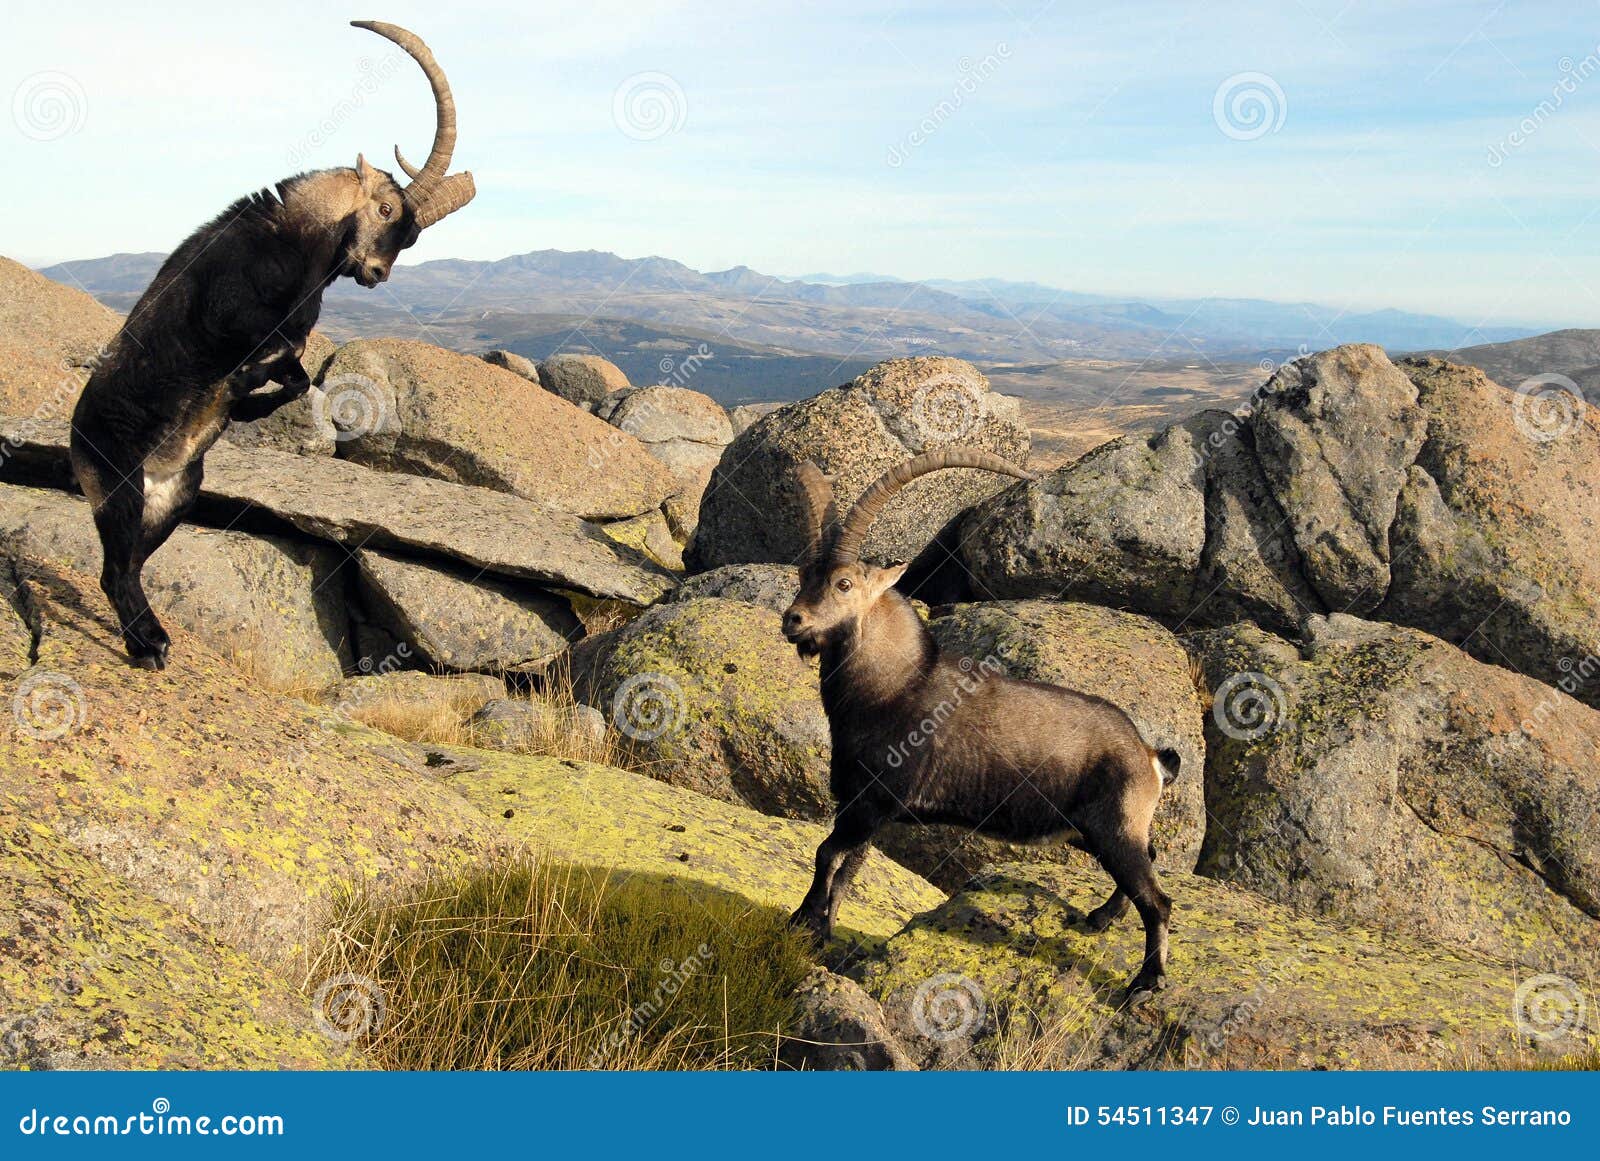 fight in male mountain gredos